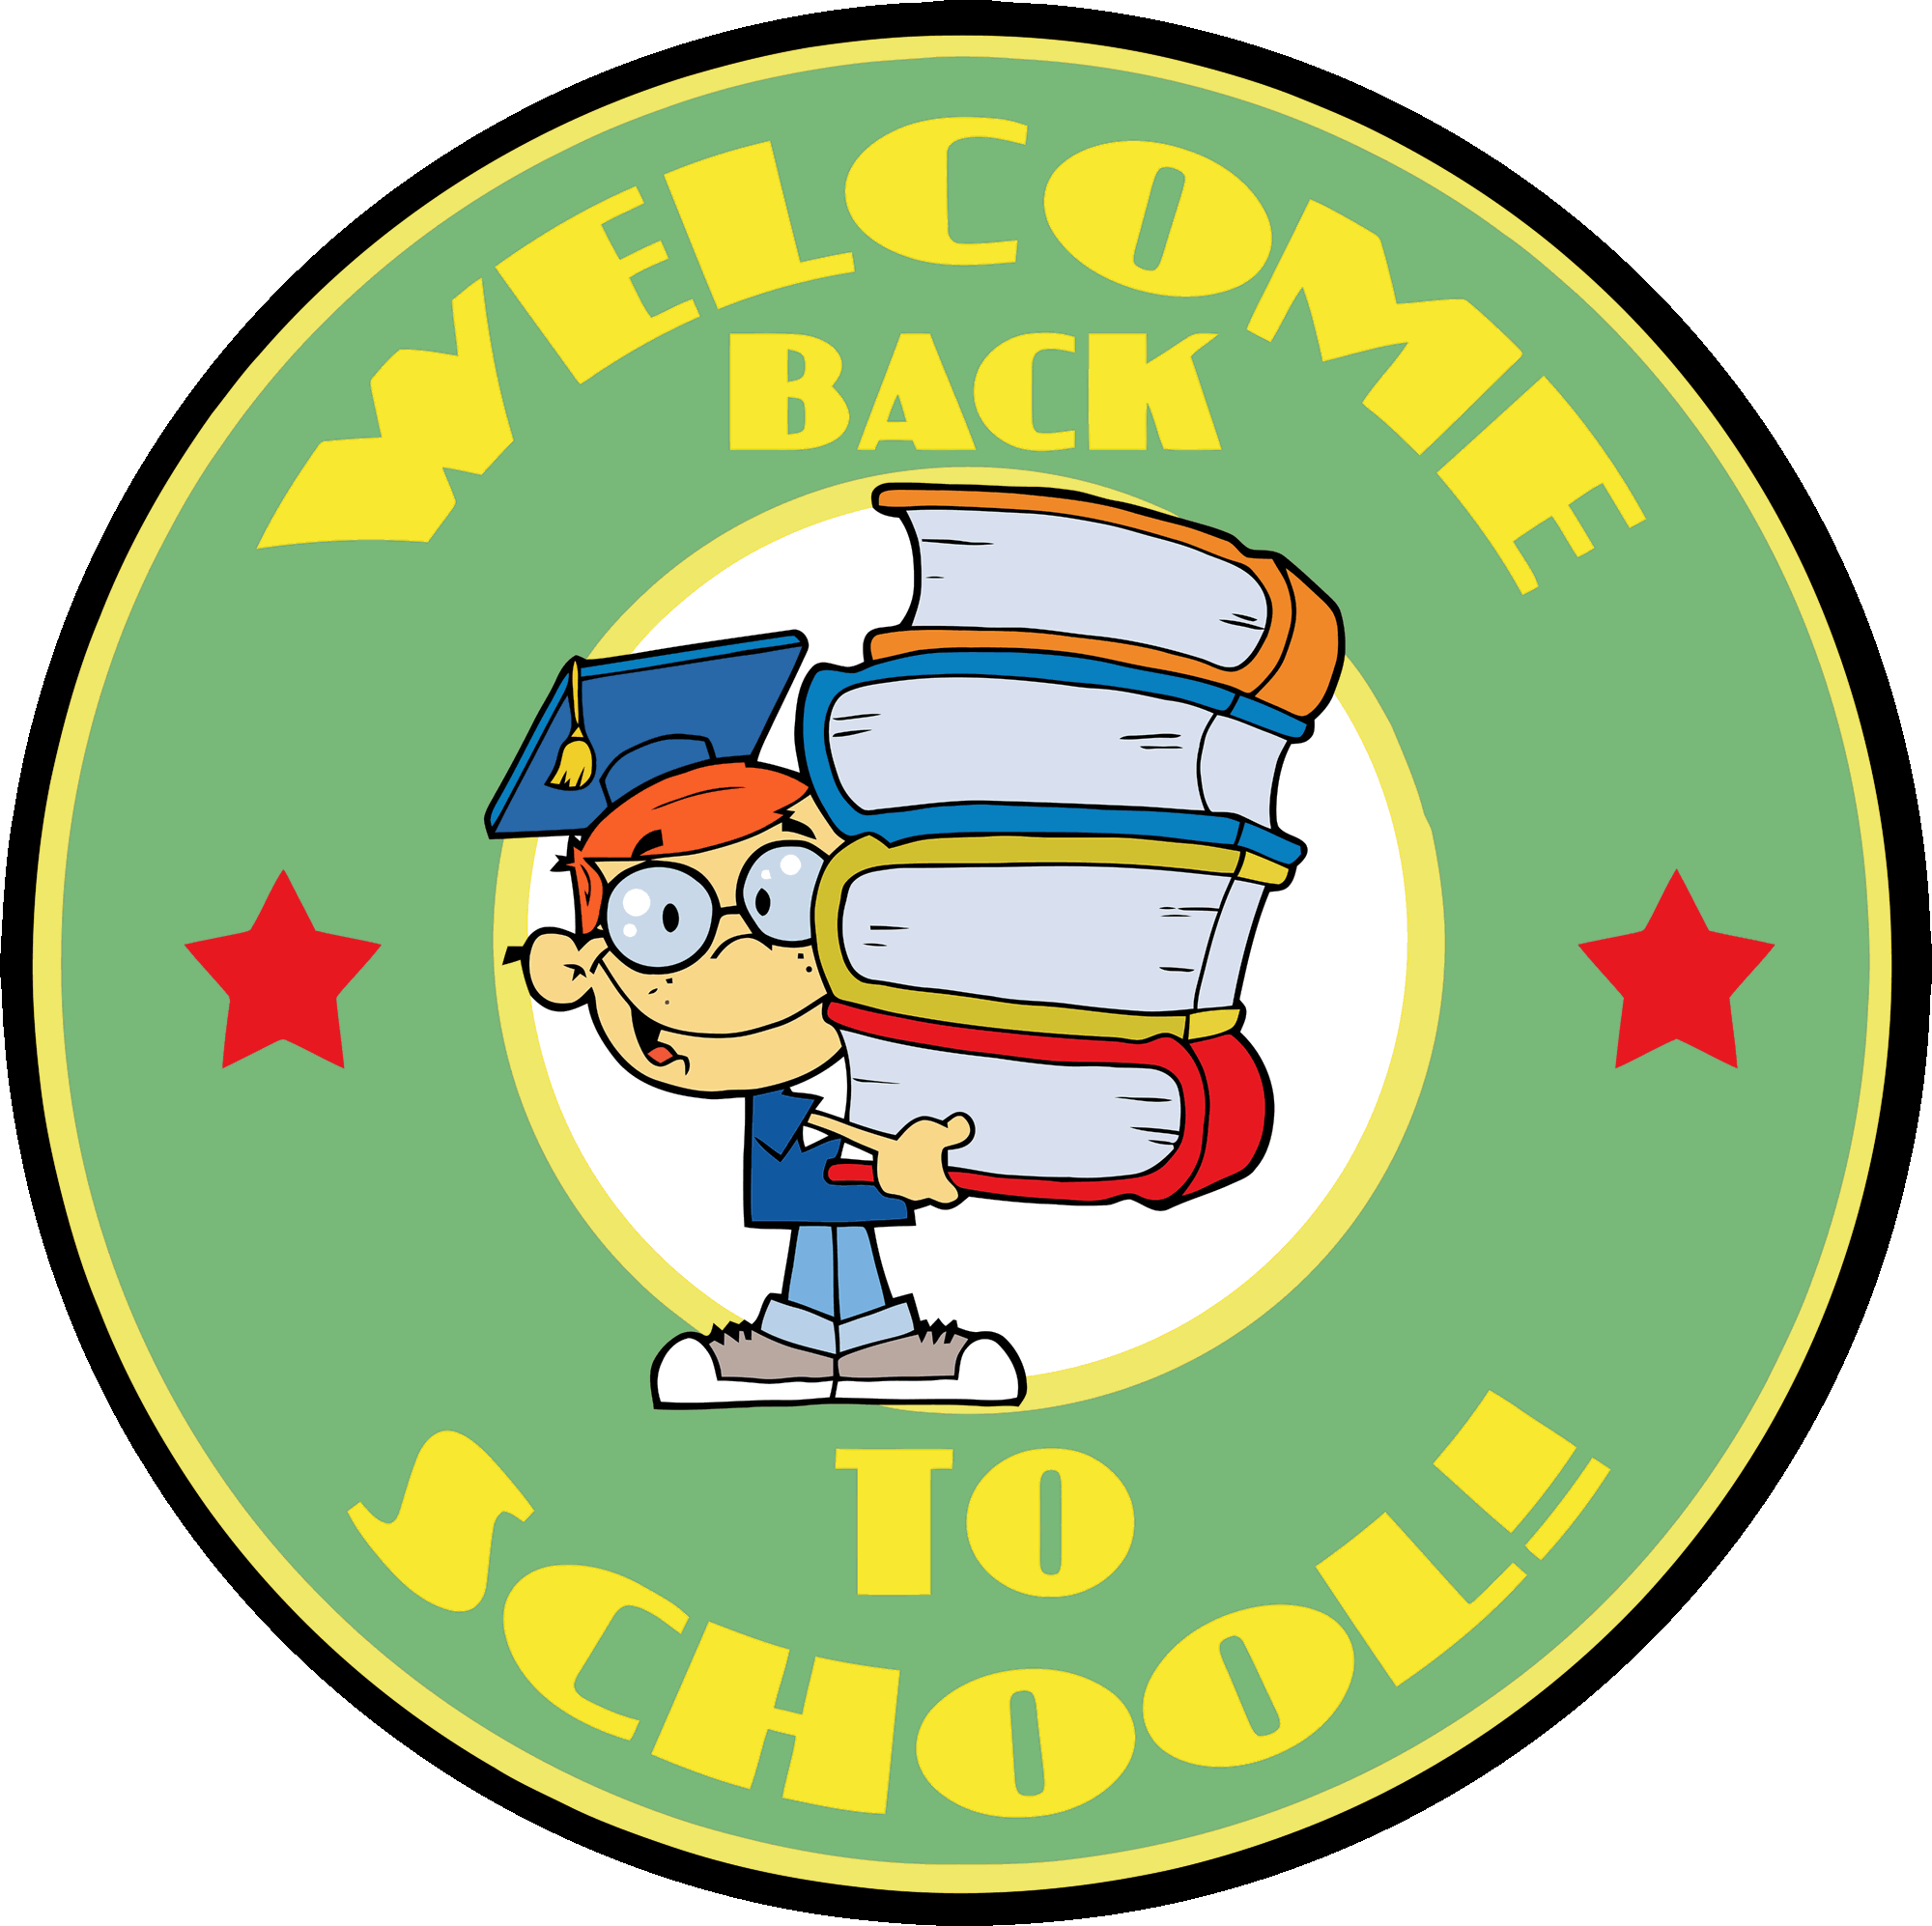 Welcome back to school clipart